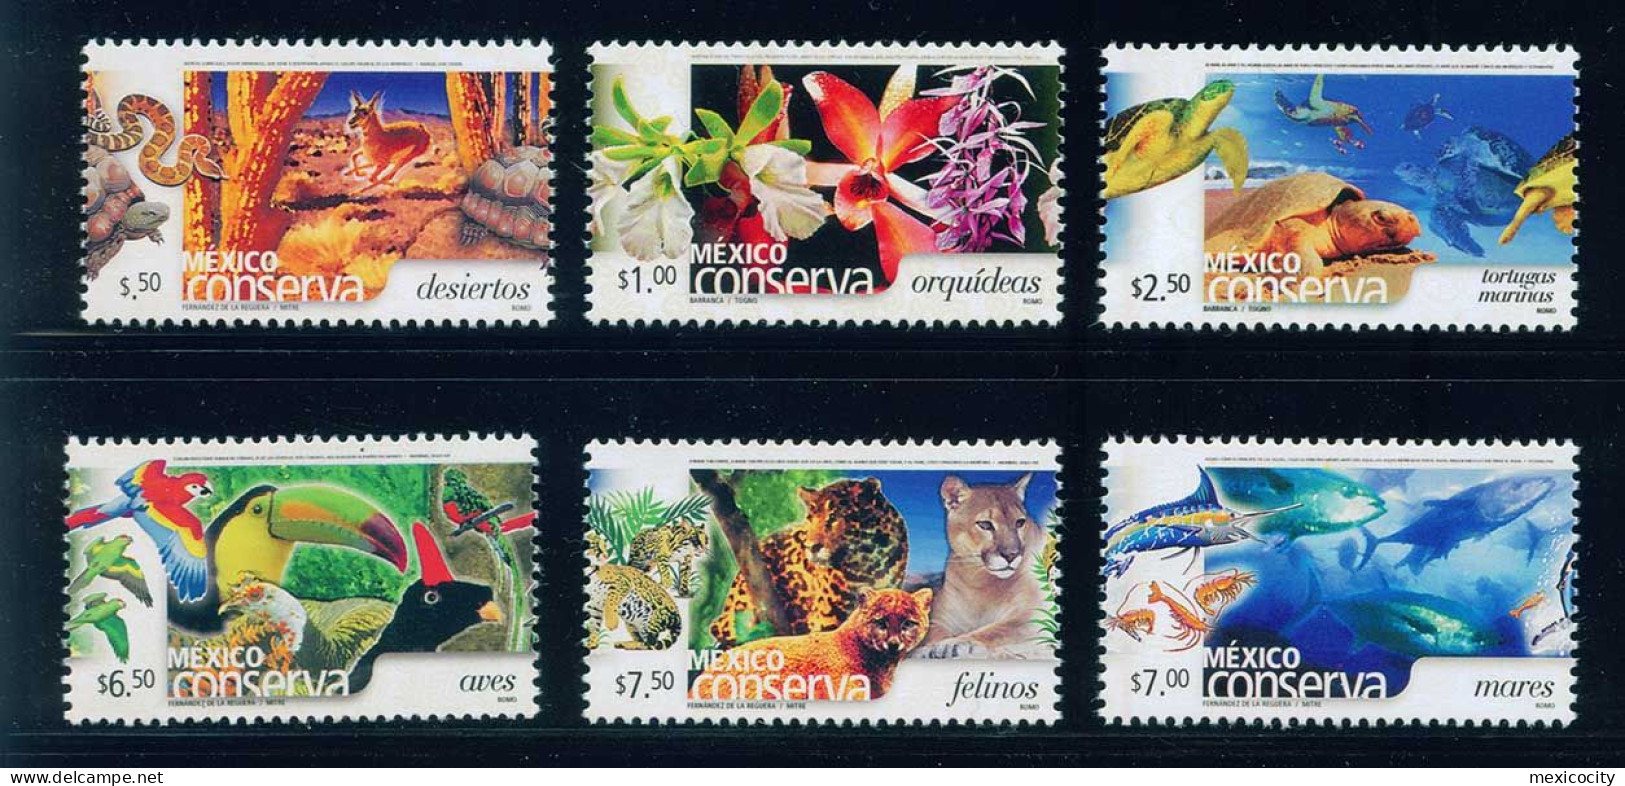 MEXICO 2005 Definitives Romo Printings 6 Diff. Stamp Collection, Mint NH Unmounted, Scarce Set Thus - Mexico